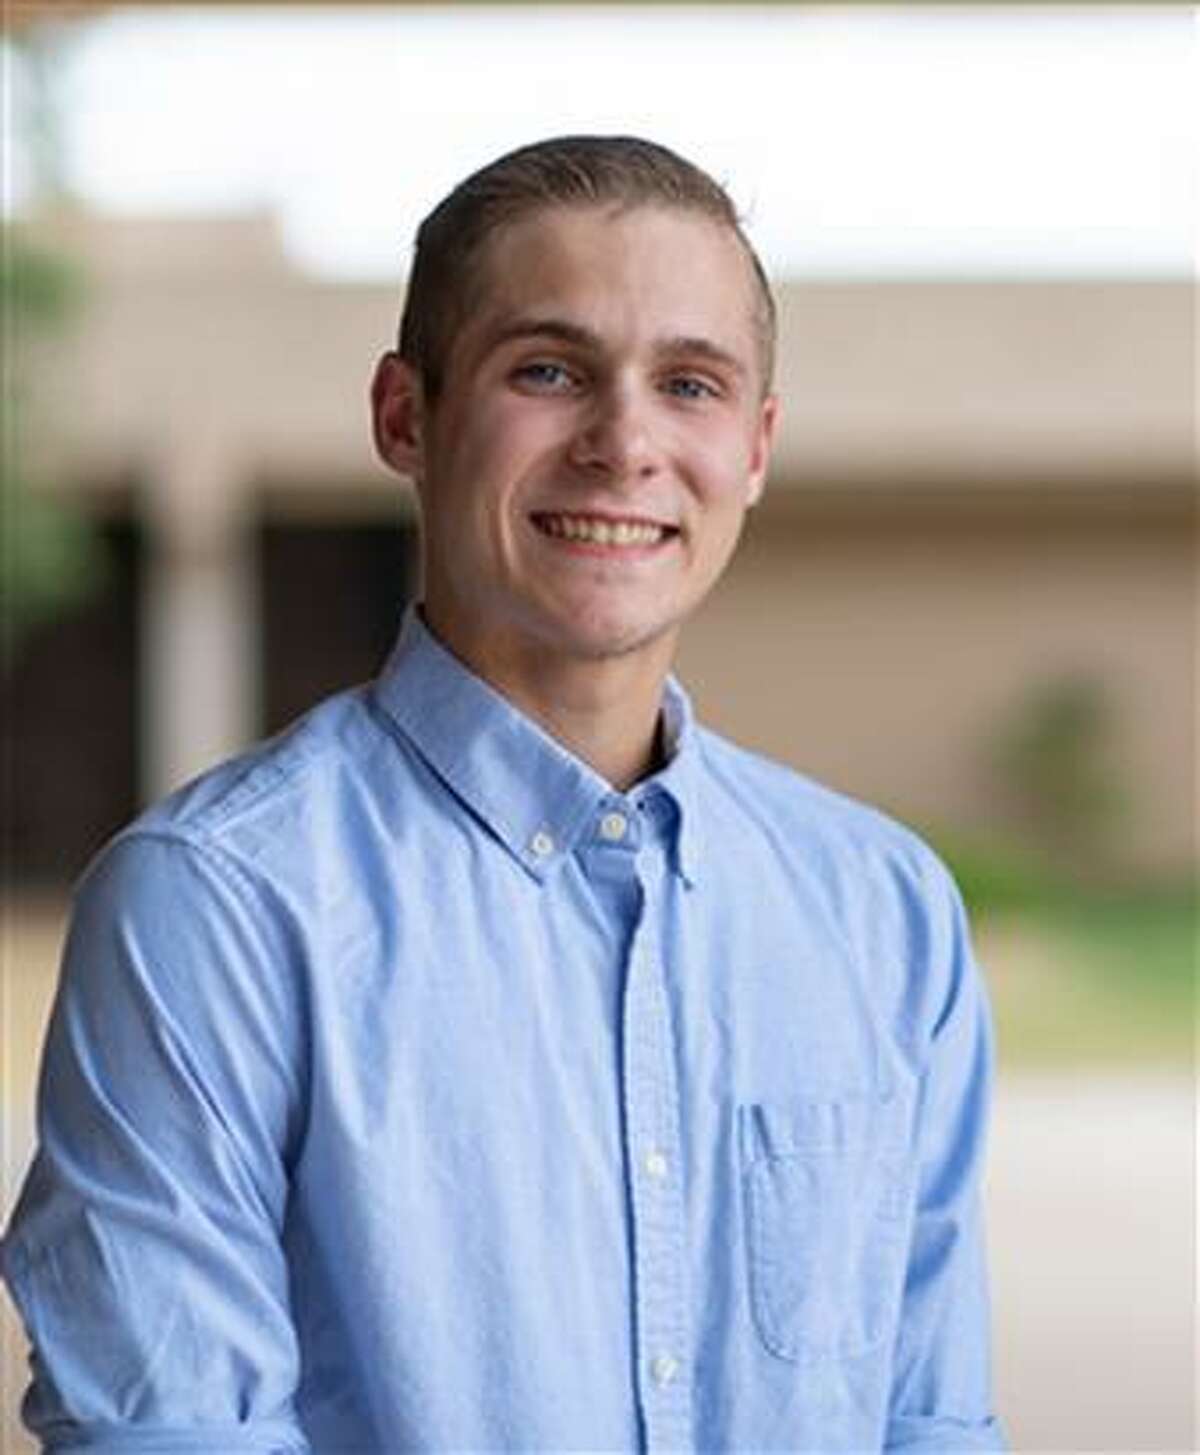 Like a lot of teens trying to find their way, Brandon Kruse was unsure of his future upon graduating from Lee High School in 2019. He found his path close to home at Midland College.